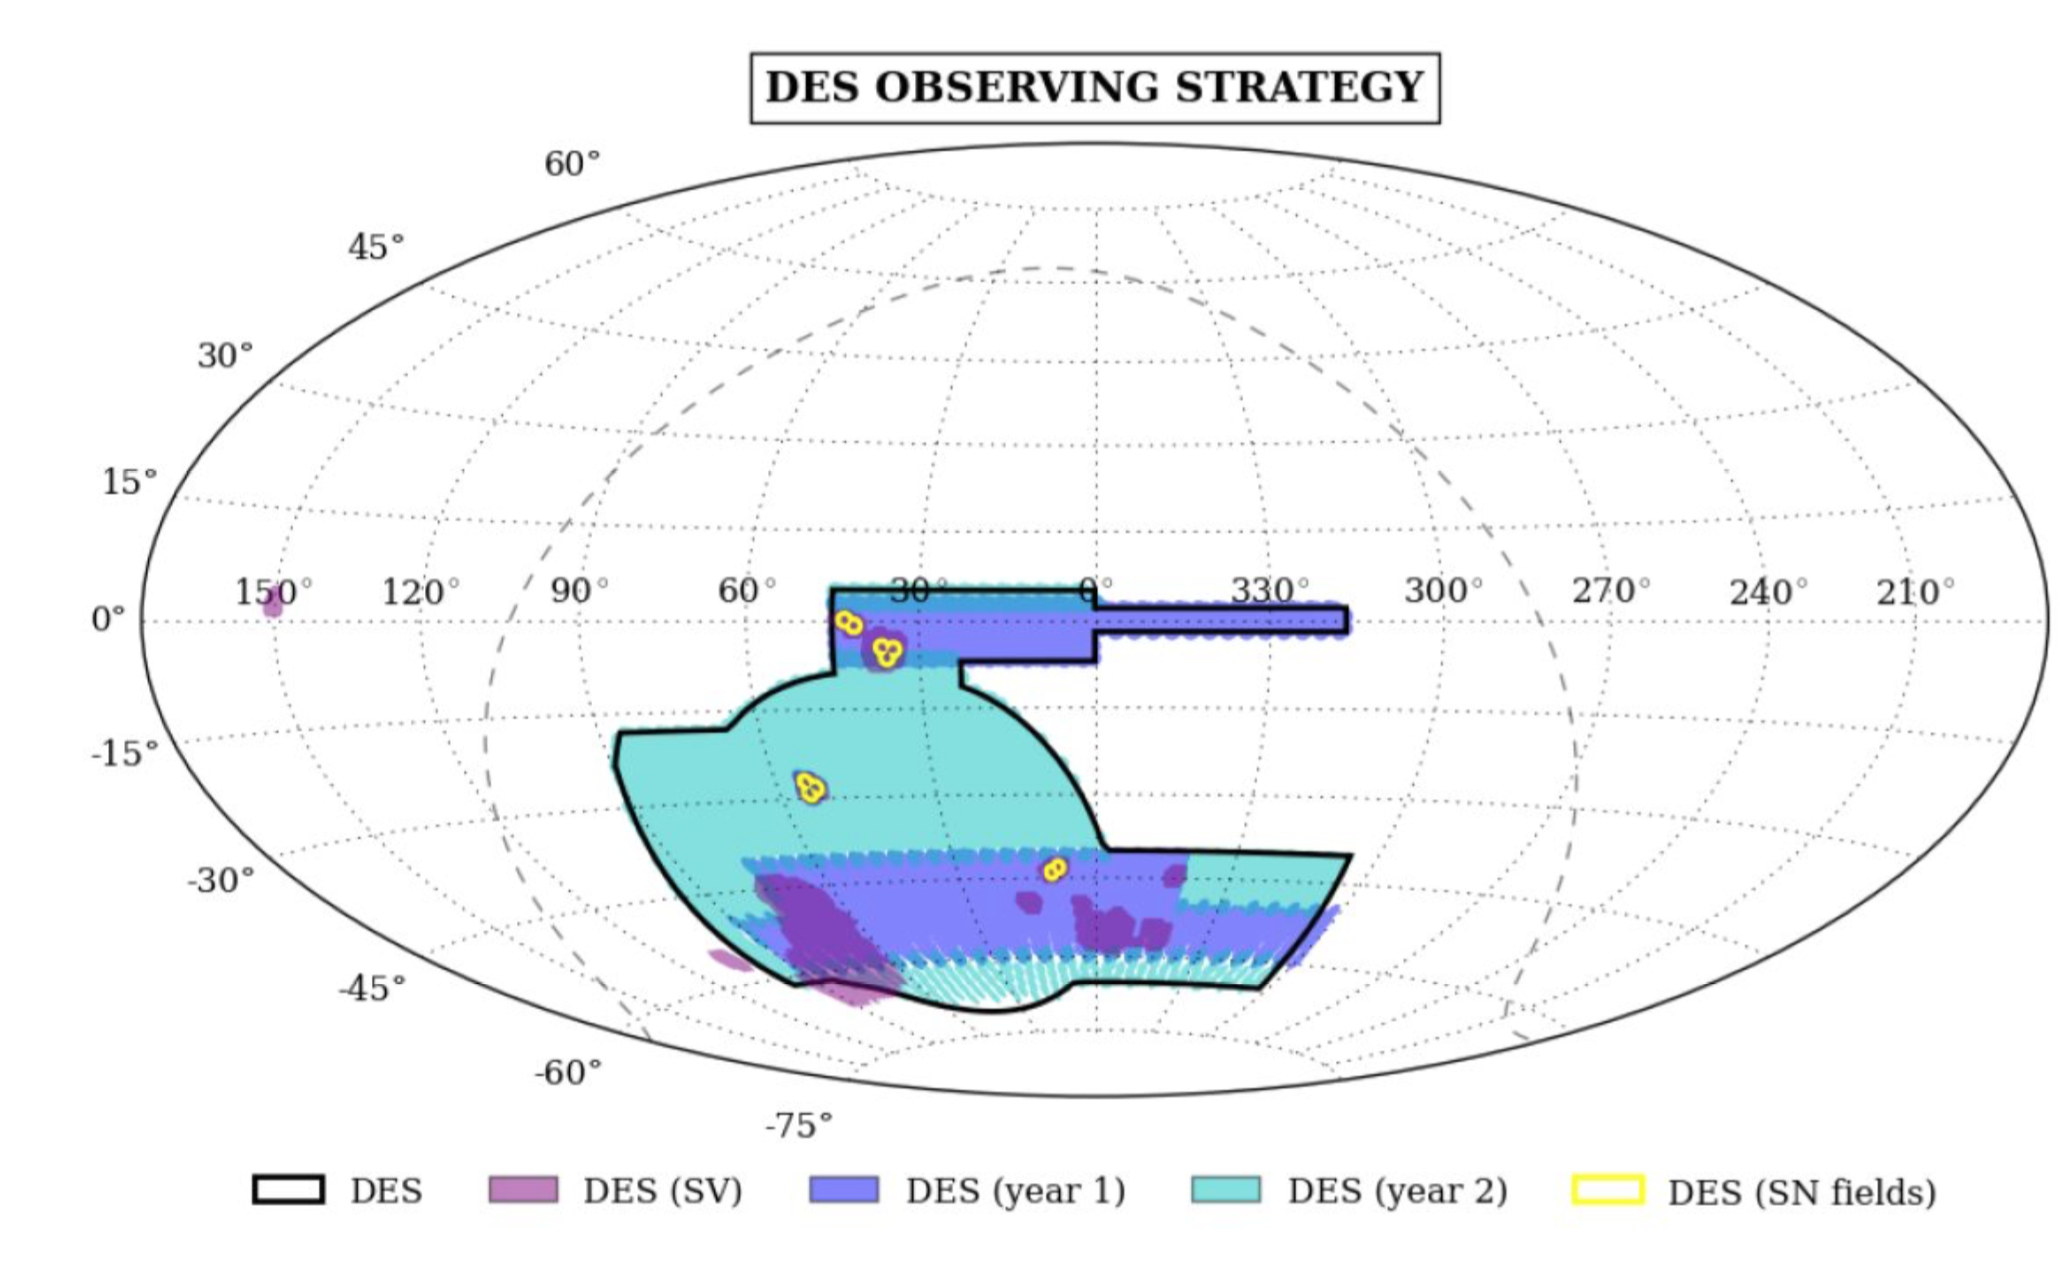 The Dark Energy Survey and operations: years 1 to 3